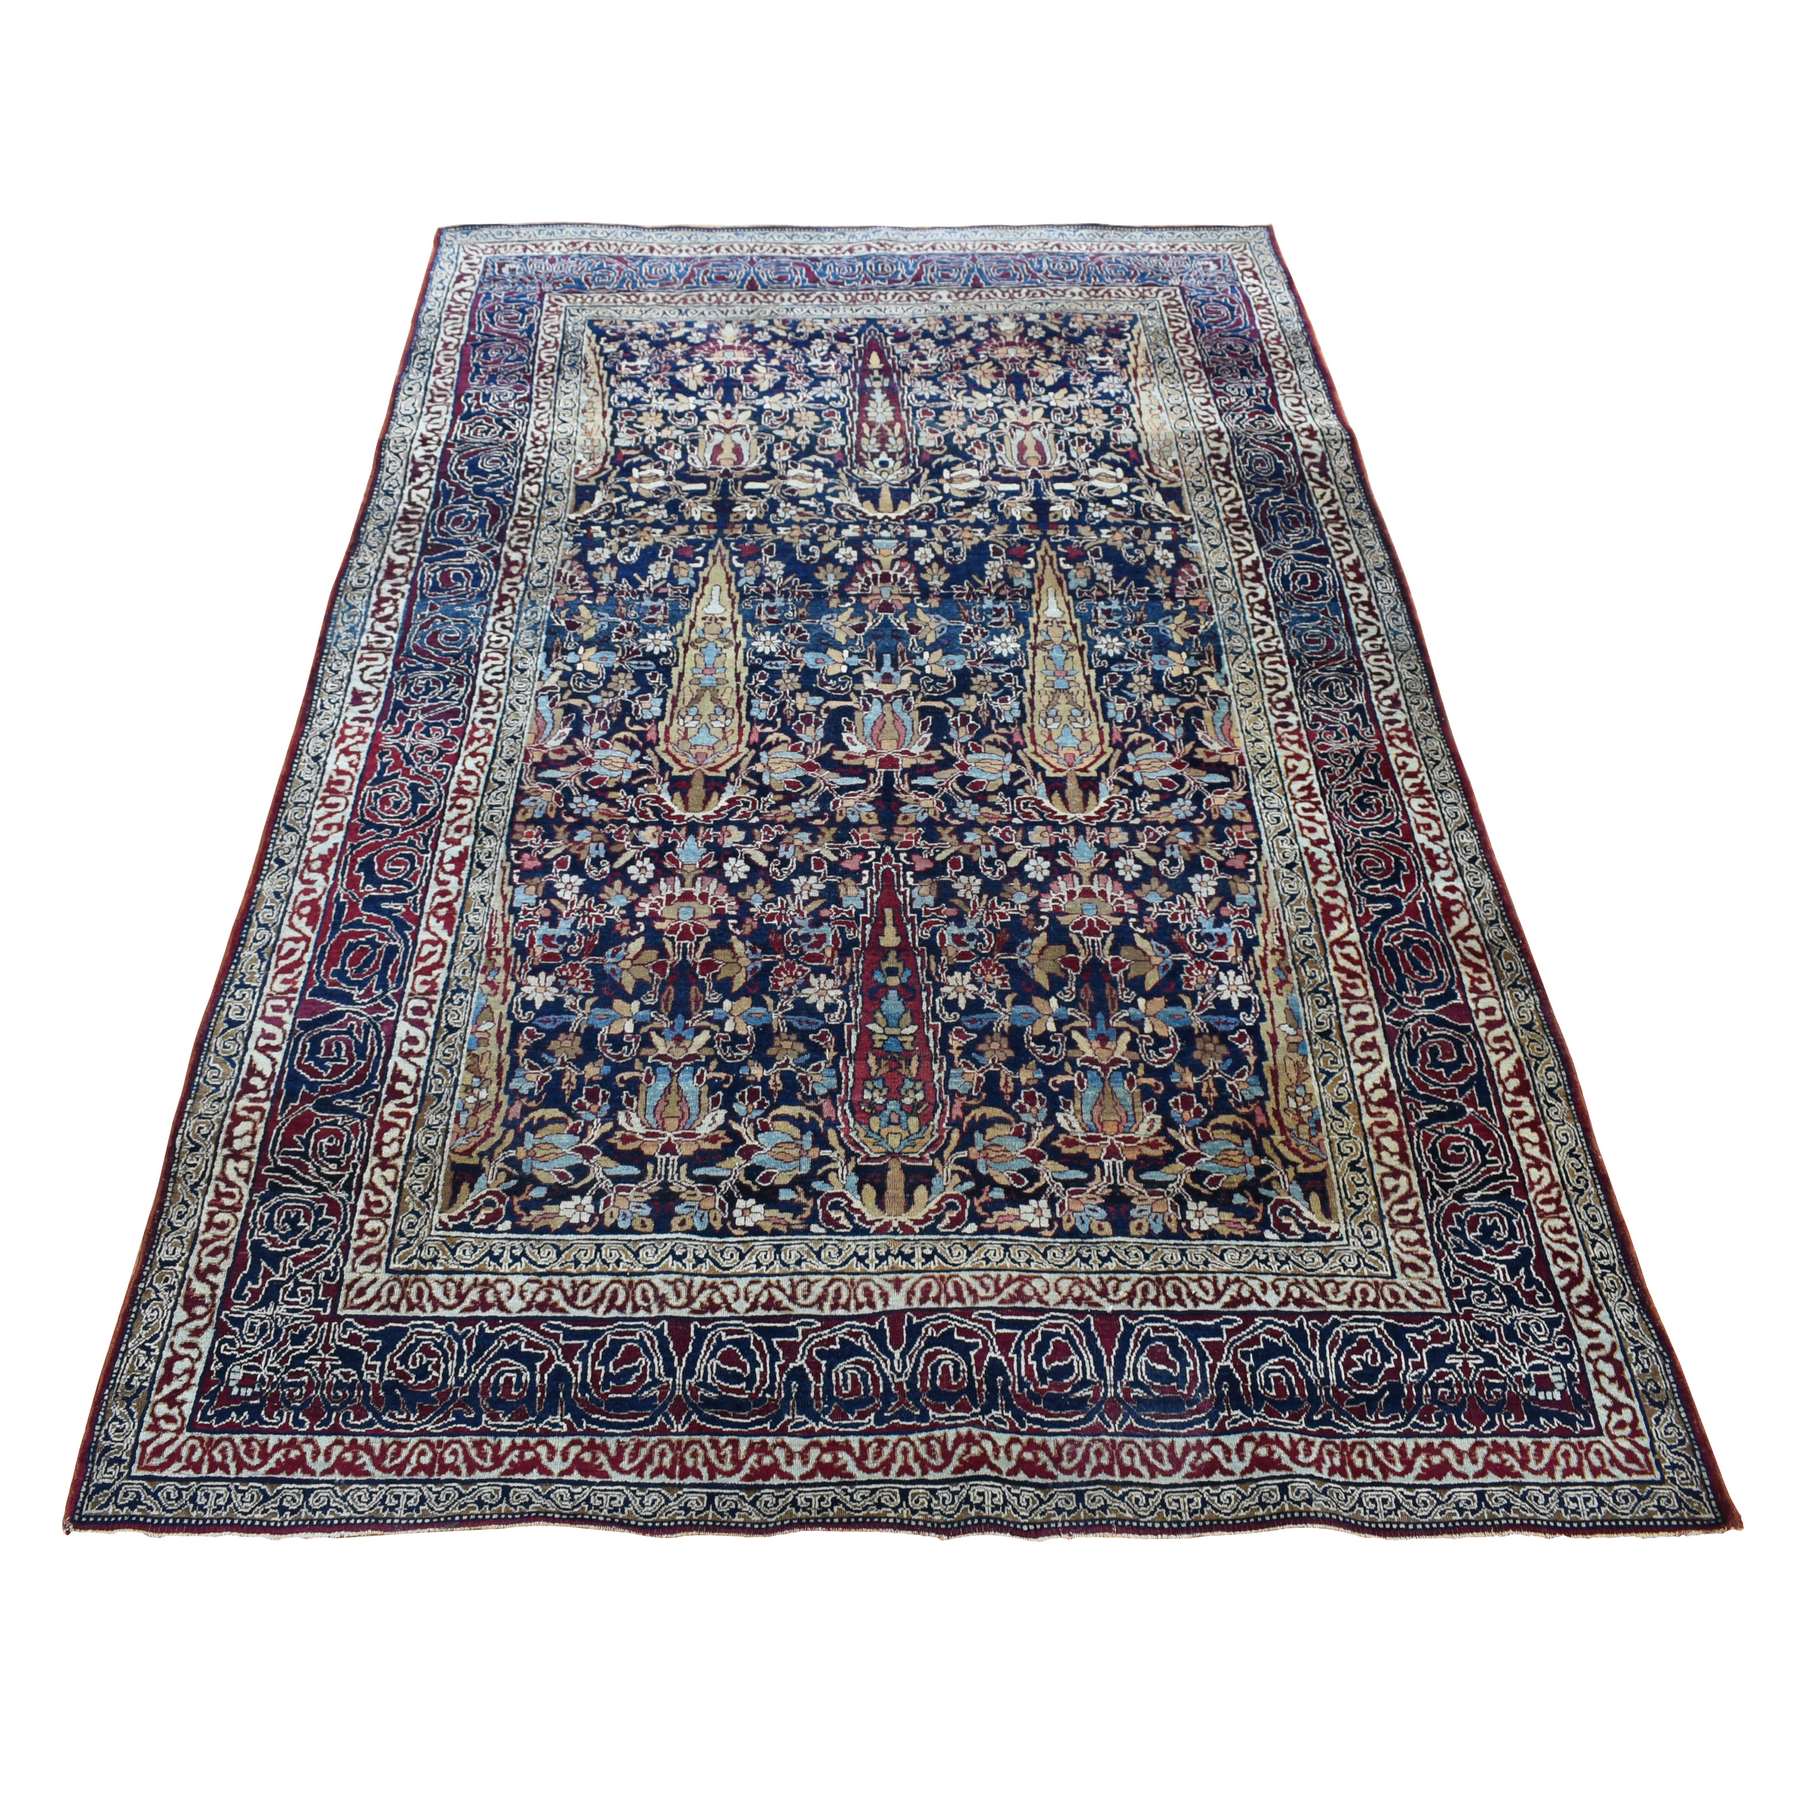  Wool Hand-Knotted Area Rug 4'3